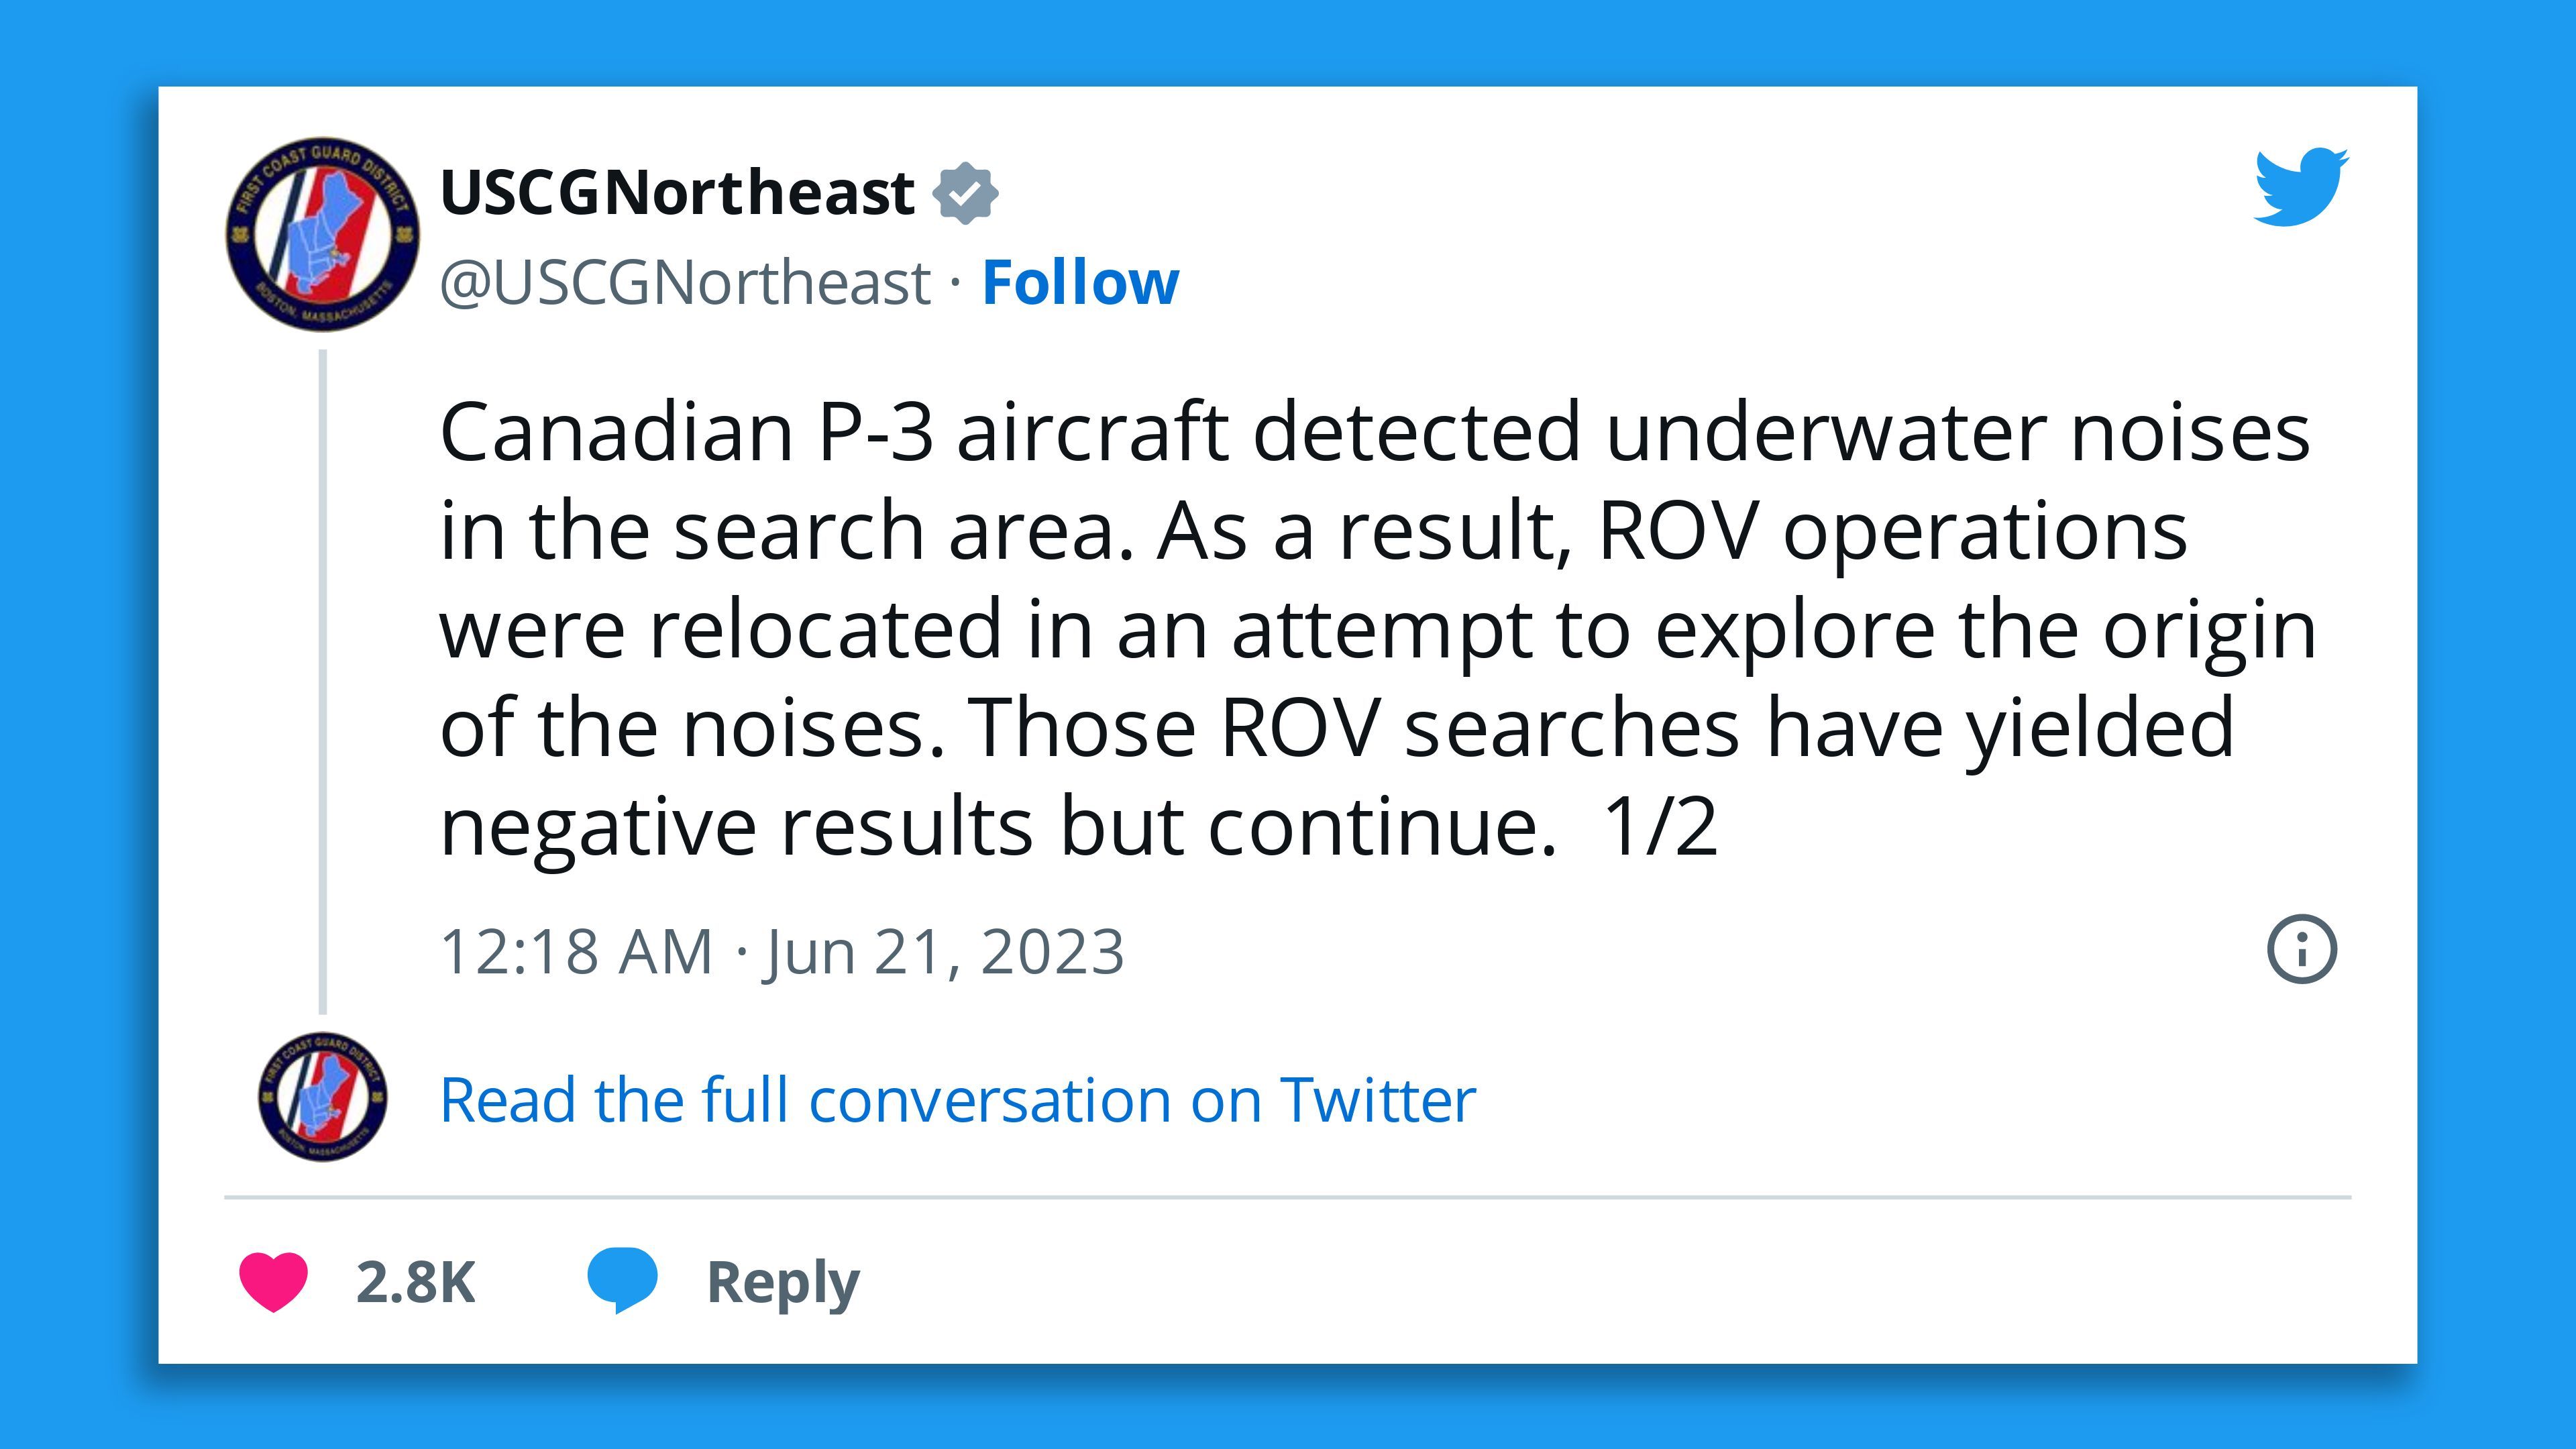 A screenshot of a U.S. Coast Guard tweet saying: "Canadian P-3 aircraft detected underwater noises in the search area. As a result, ROV operations were relocated in an attempt to explore the origin of the noises. Those ROV searches have yielded negative results but continue."